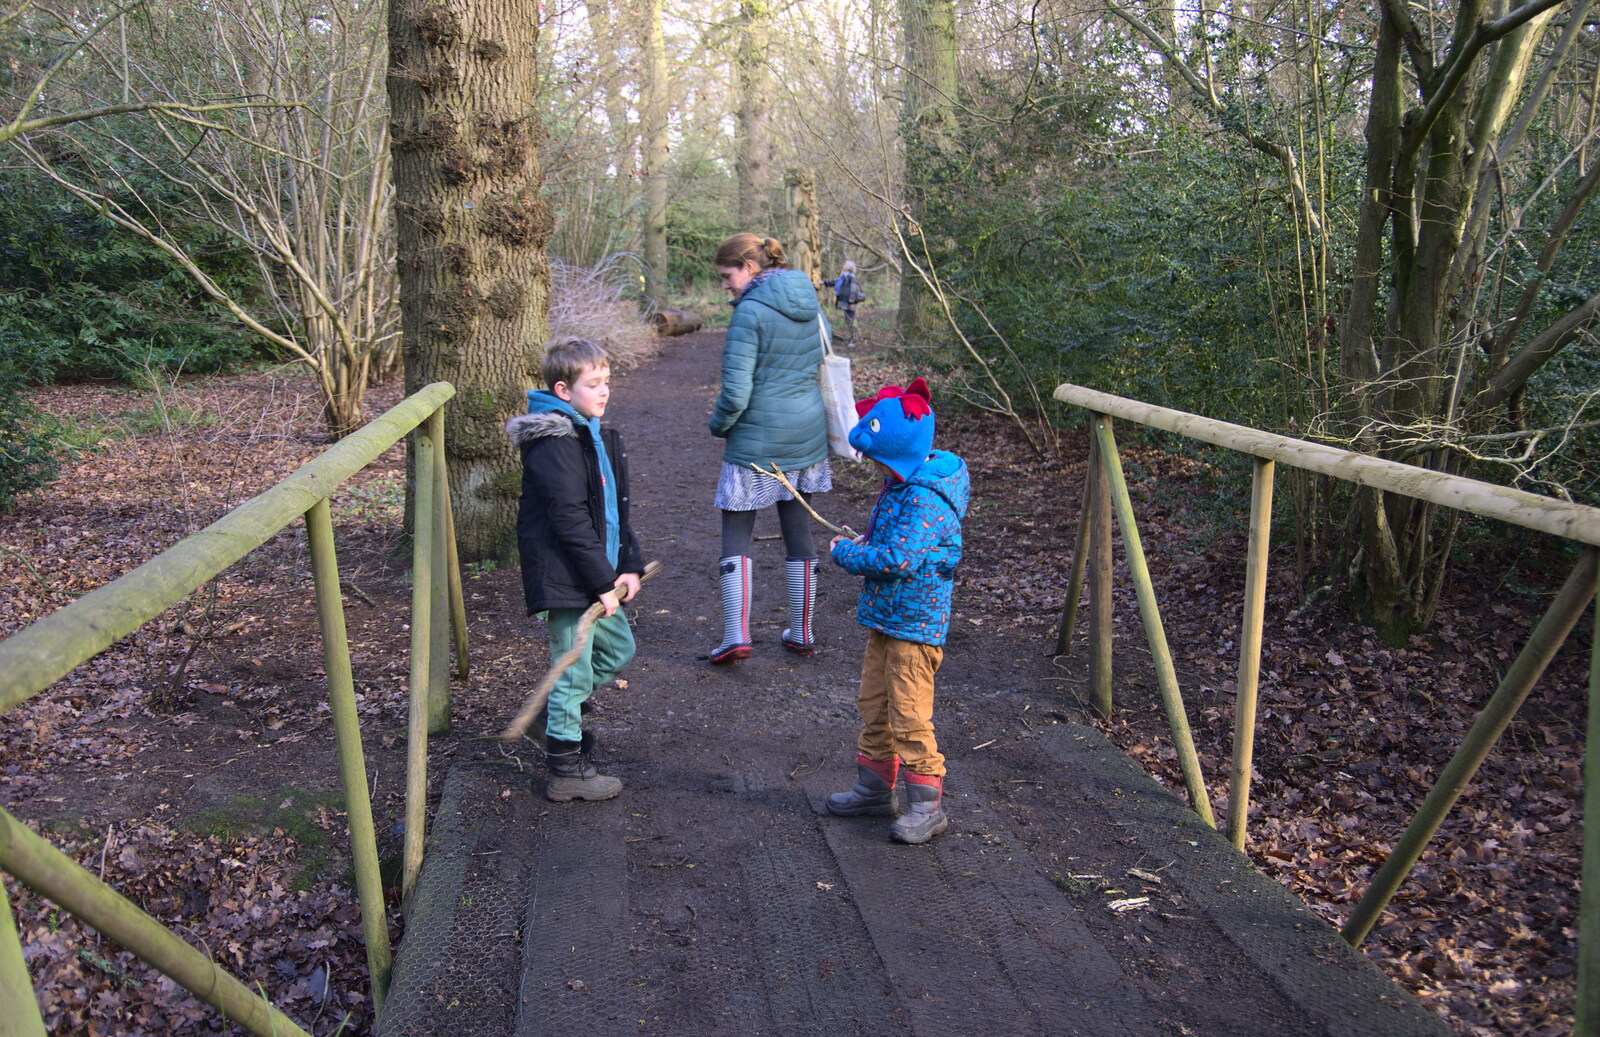 On a small bridge in the woods from Life Below Stairs, Ickworth House, Horringer, Suffolk - 28th January 2018